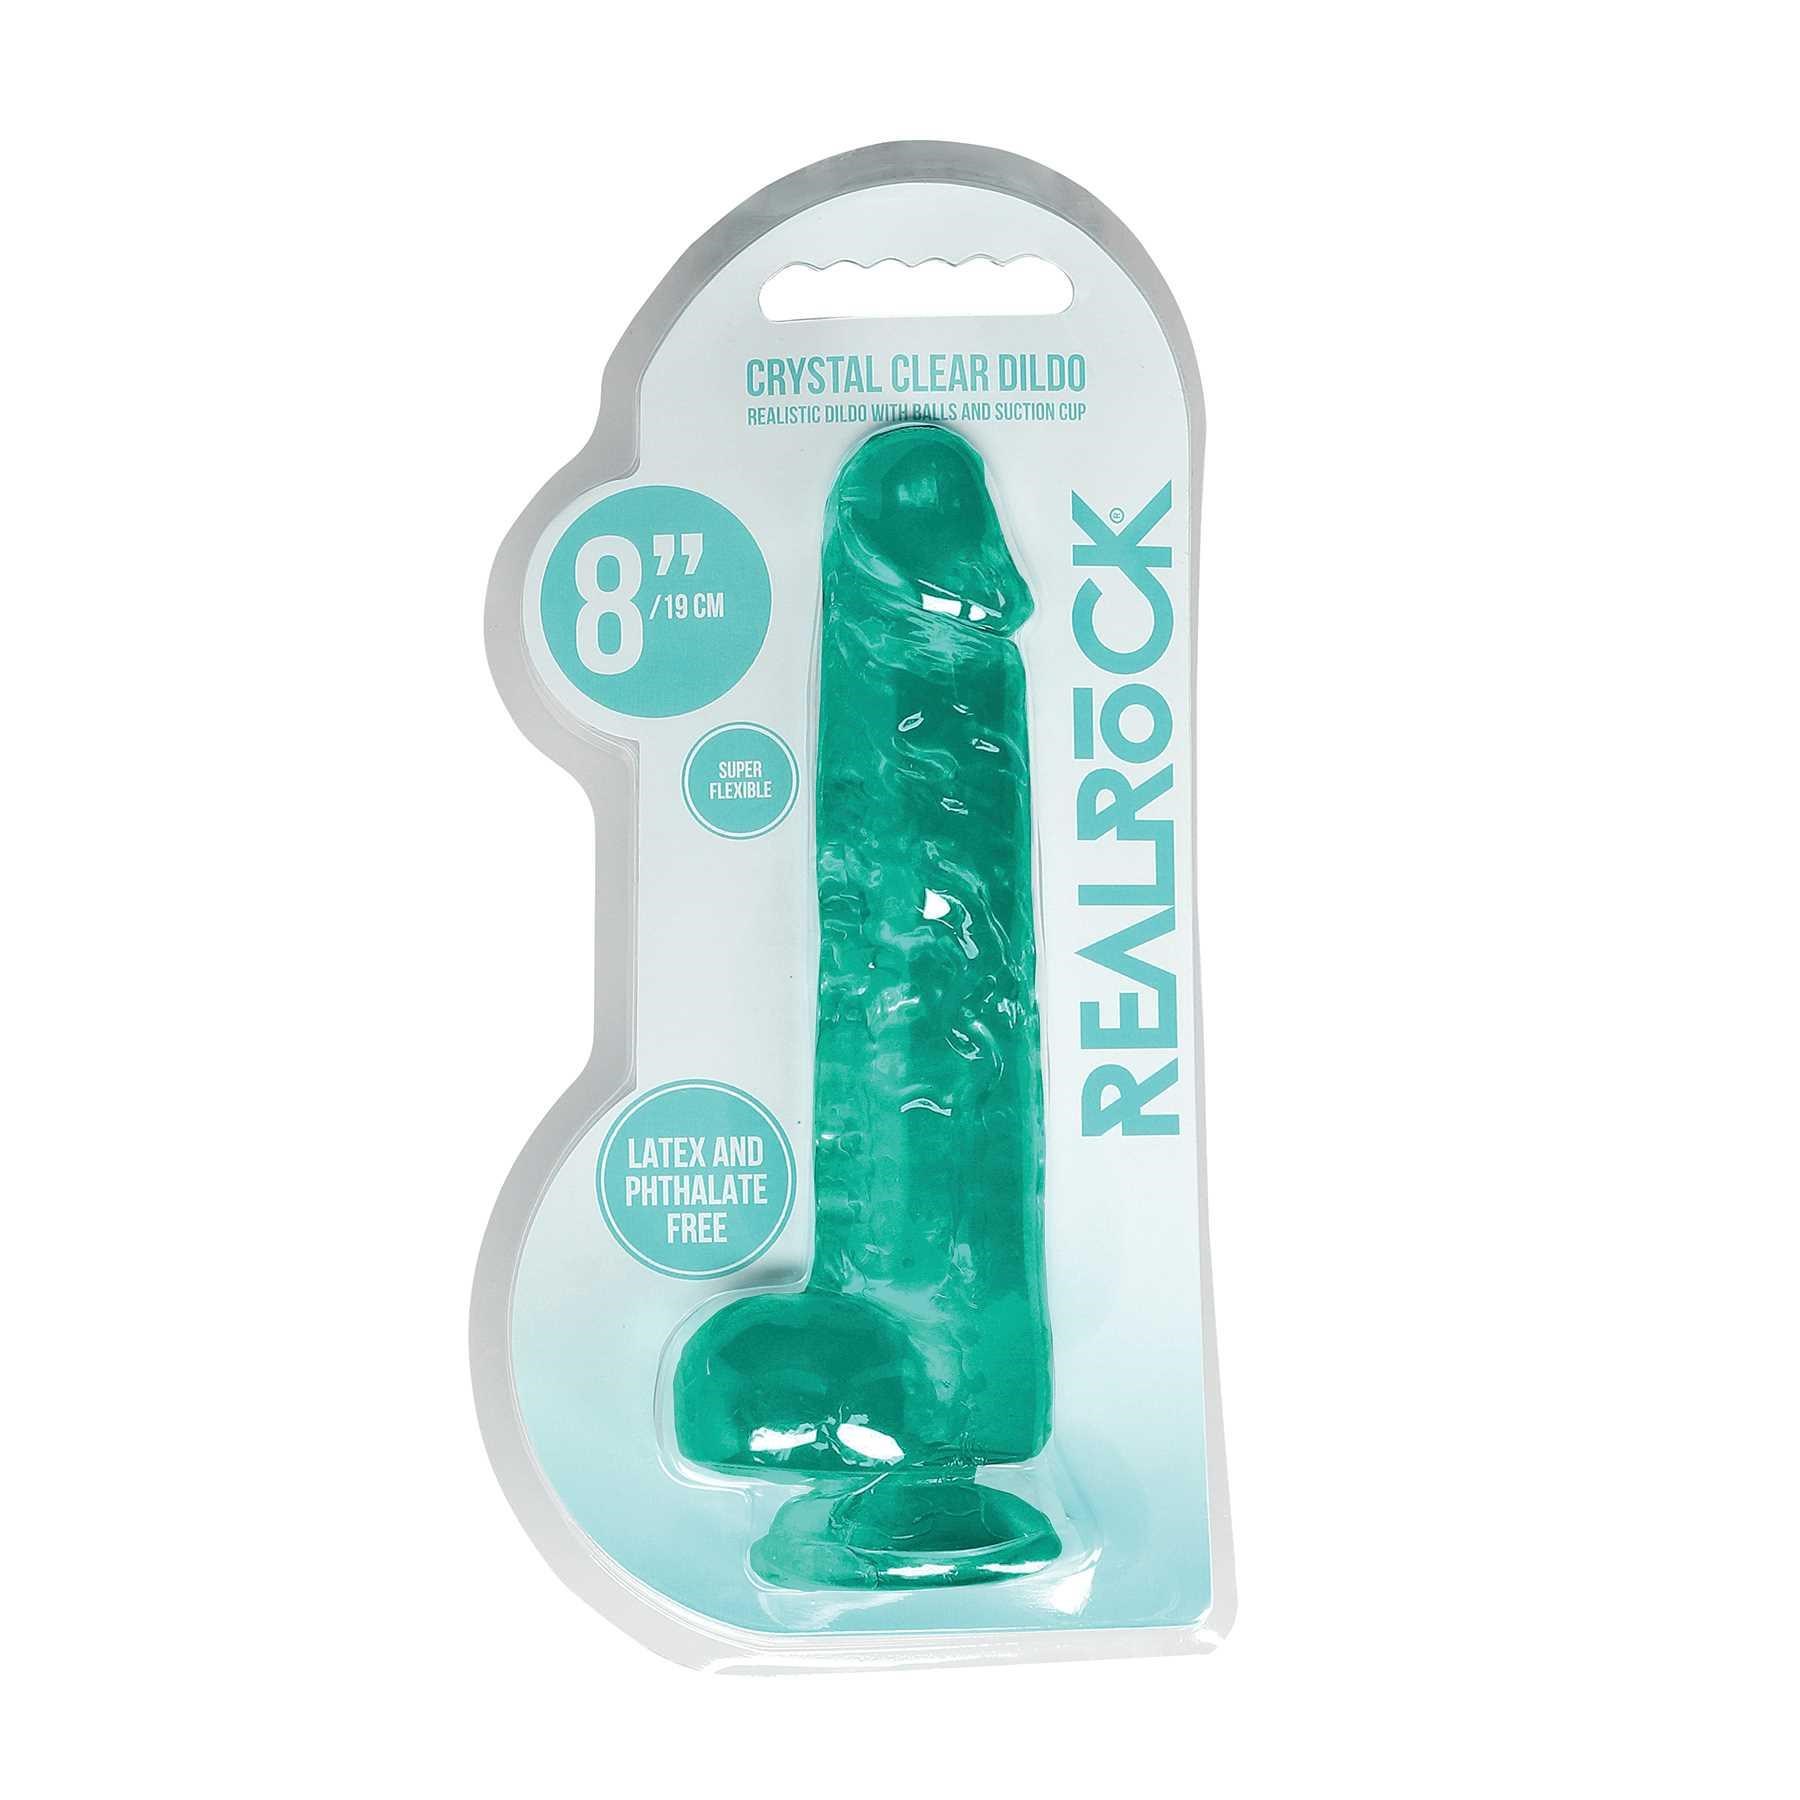 Realrock Realistic Dildo With Balls packaging